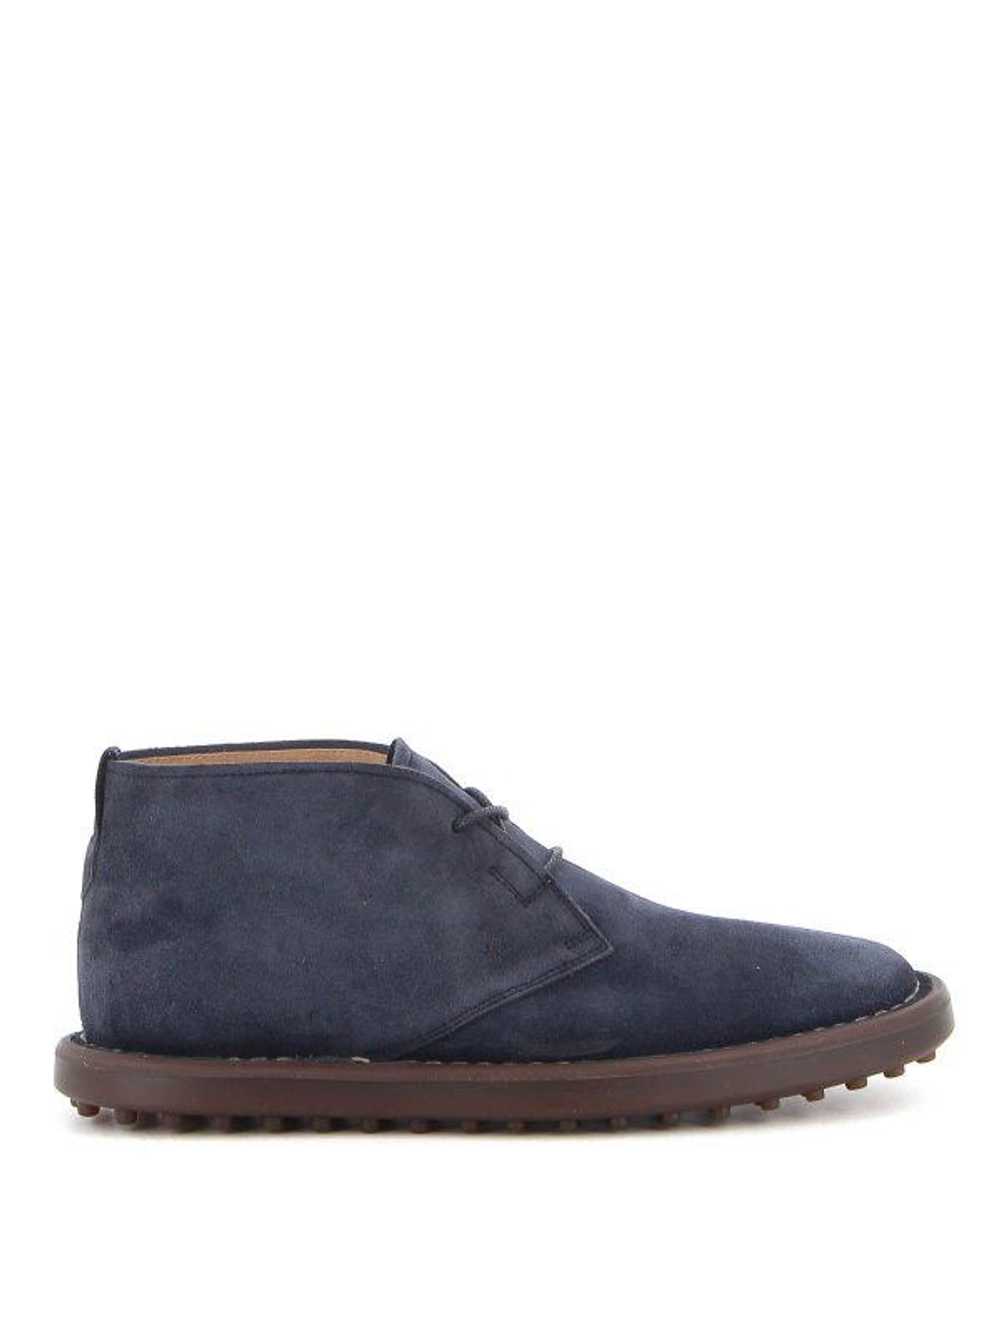 Tod's o1lxy1mk0524 Loafers in Dark Blue - image 1